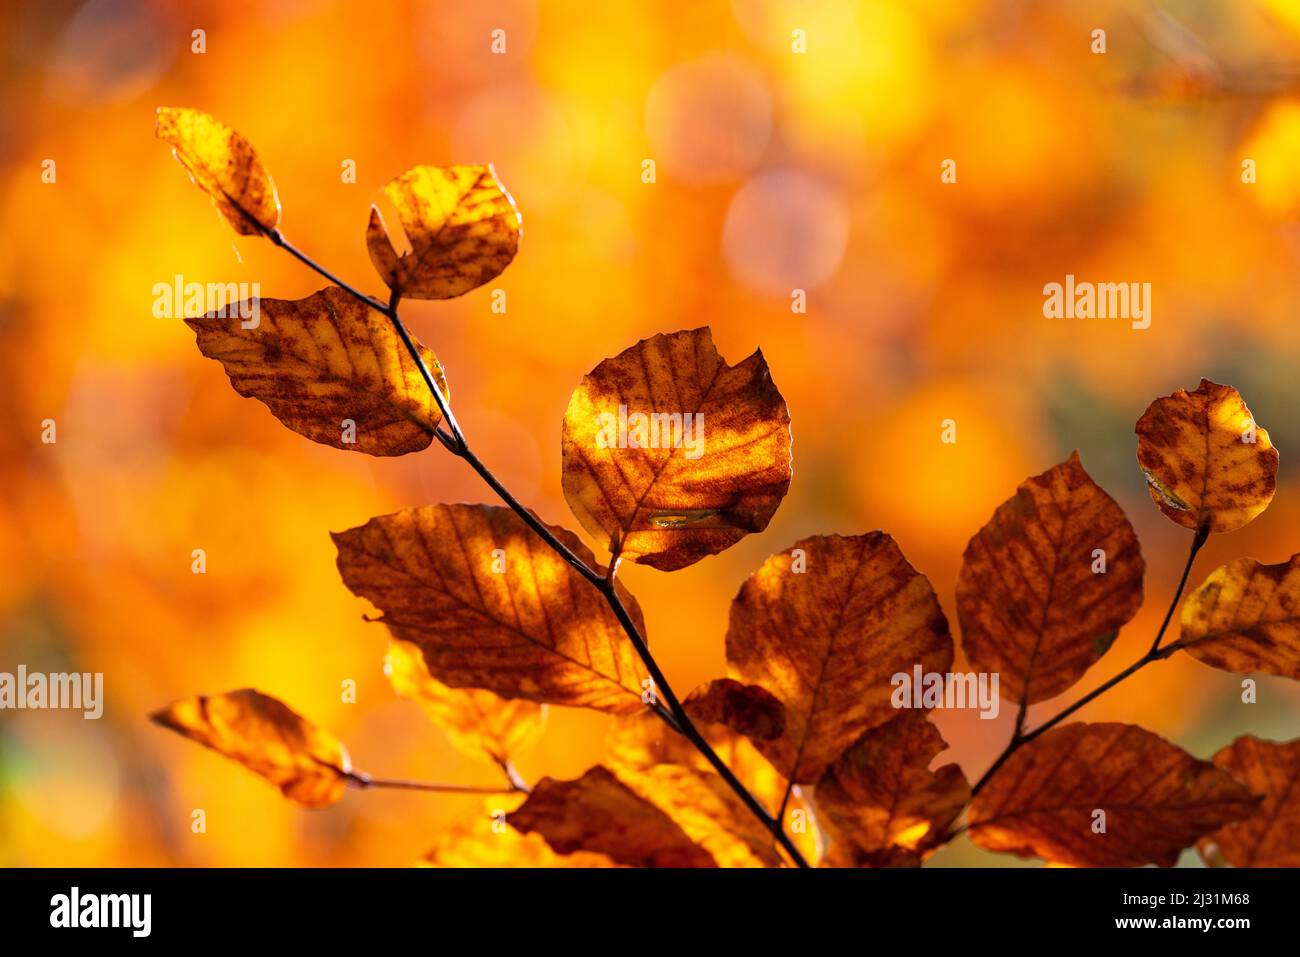 Autumn colors of leaves on a branch alternating between sun and shade, Lamstedt, Lower Saxony, Germany Stock Photo